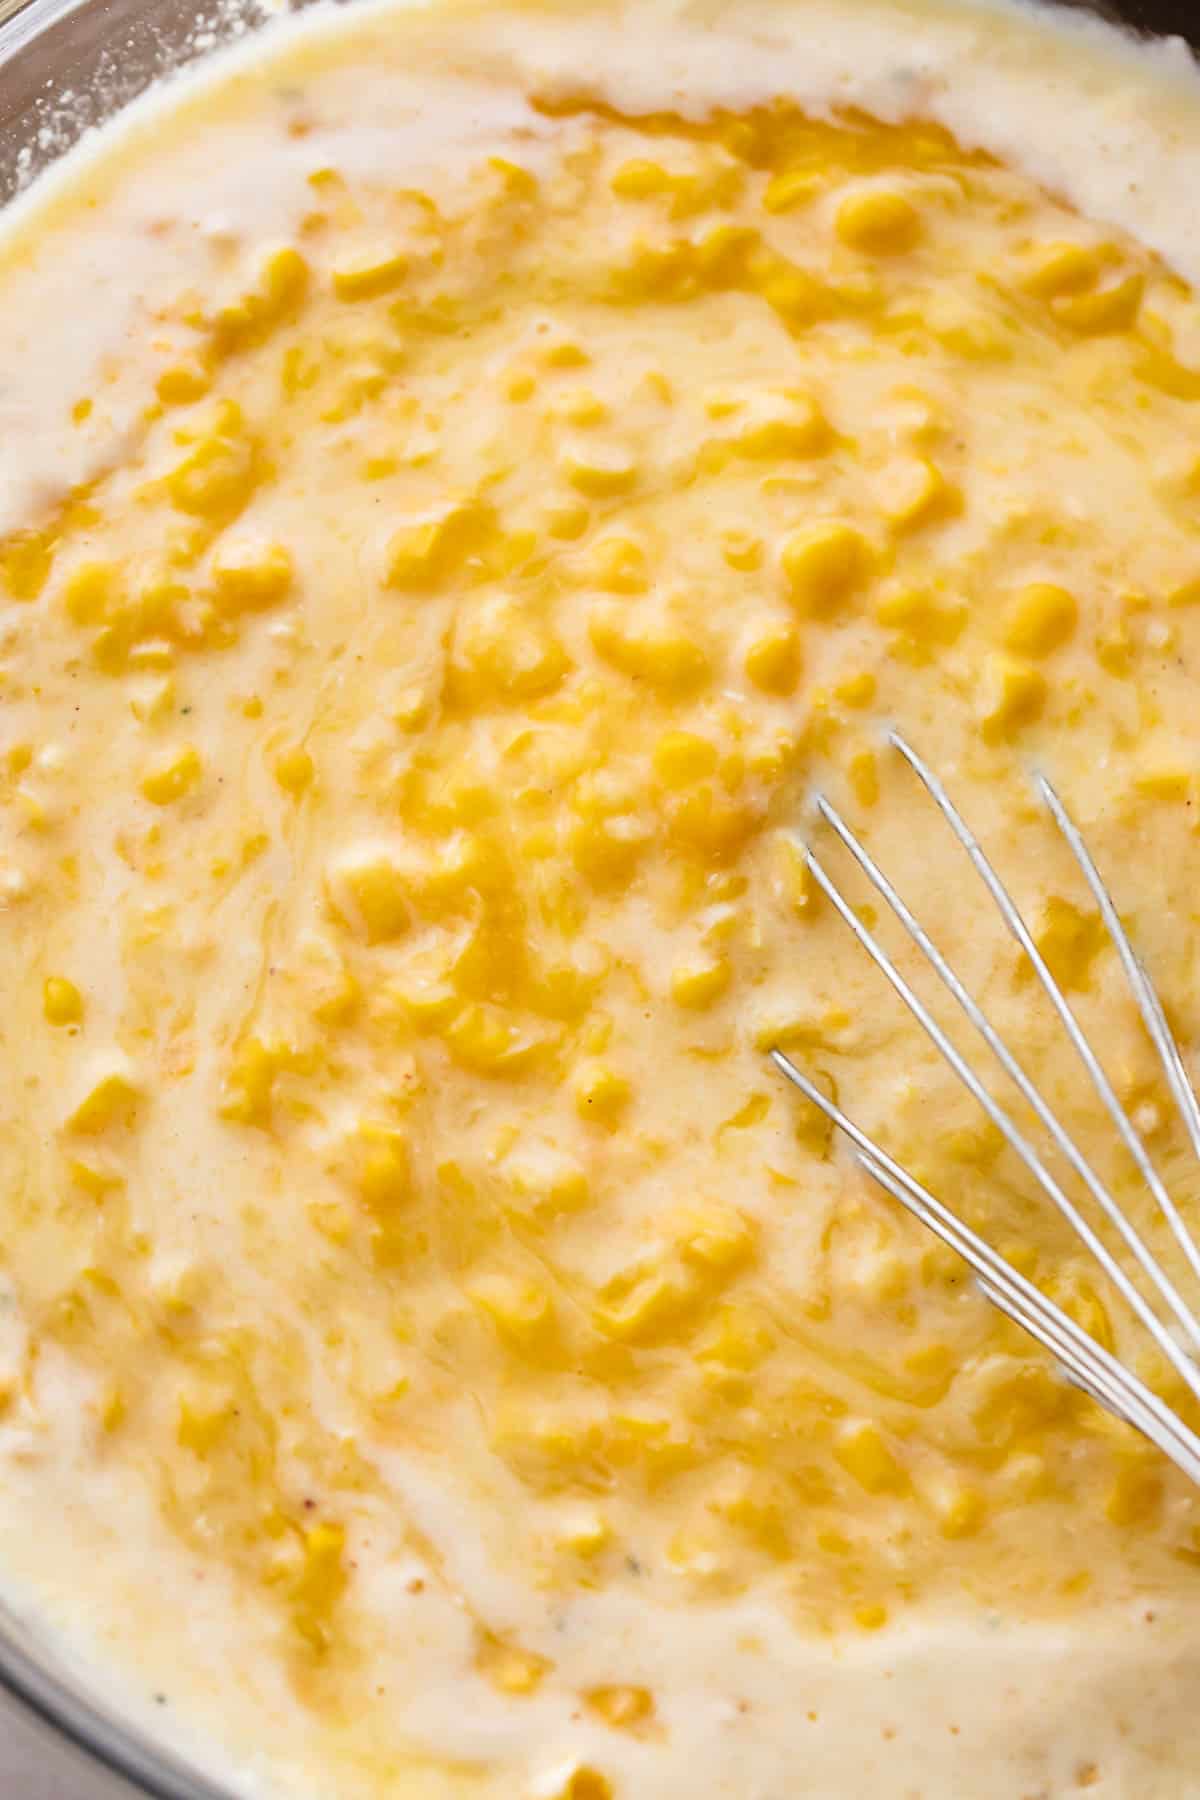 A glass mixing bowl filled with corn pudding batter.